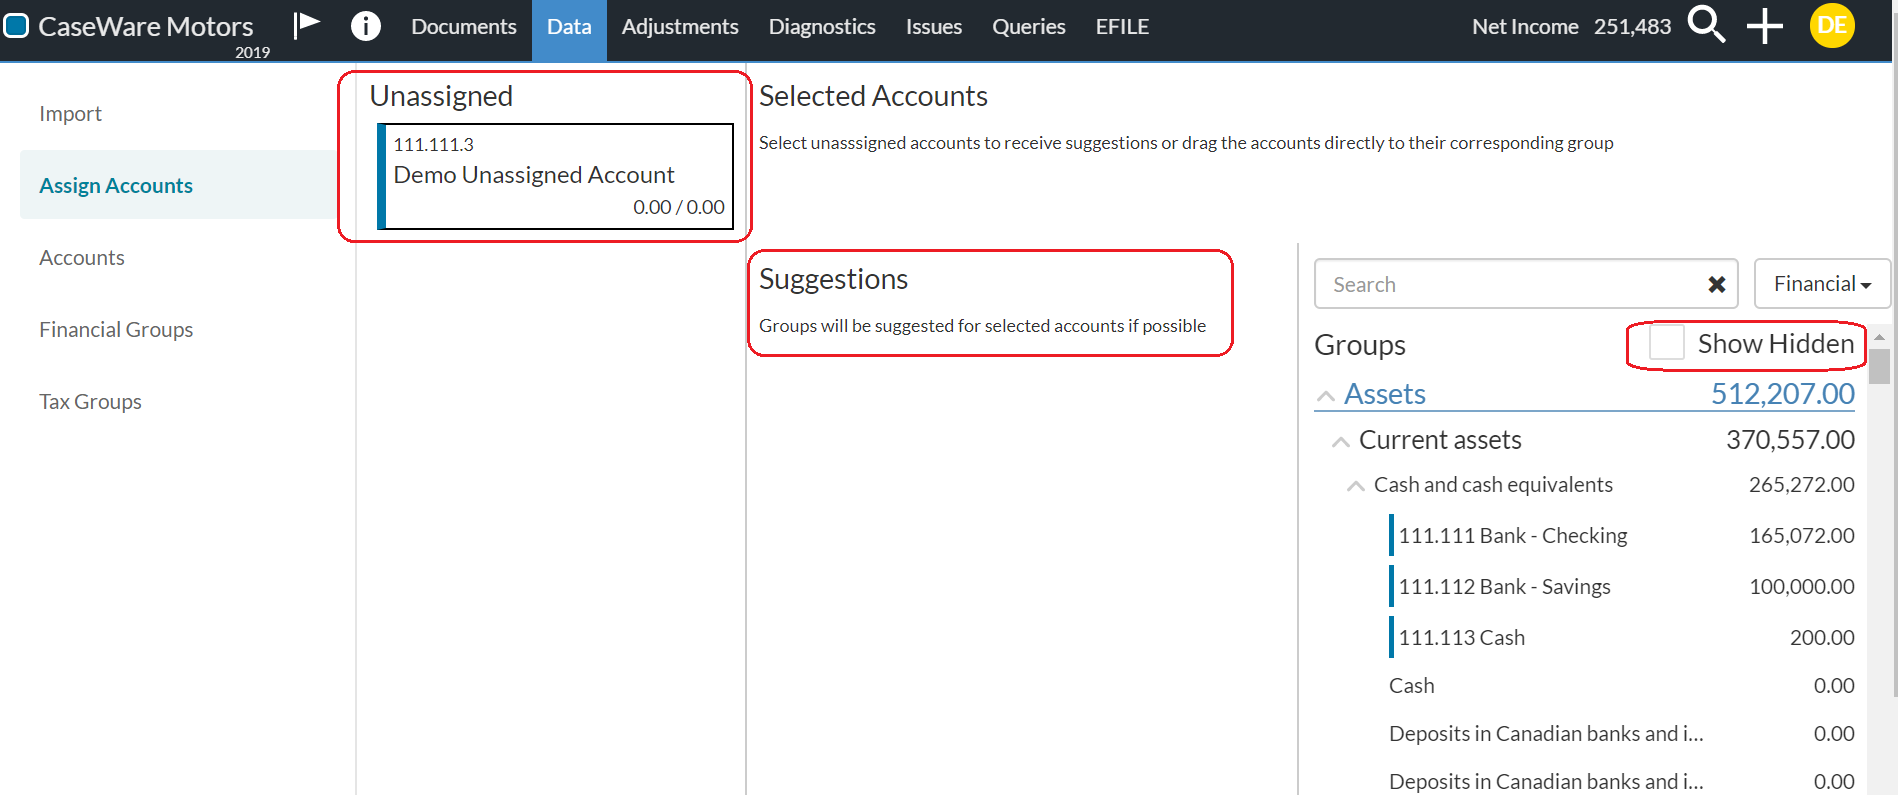 Assign Accounts tab, unassigned account and how groups display.